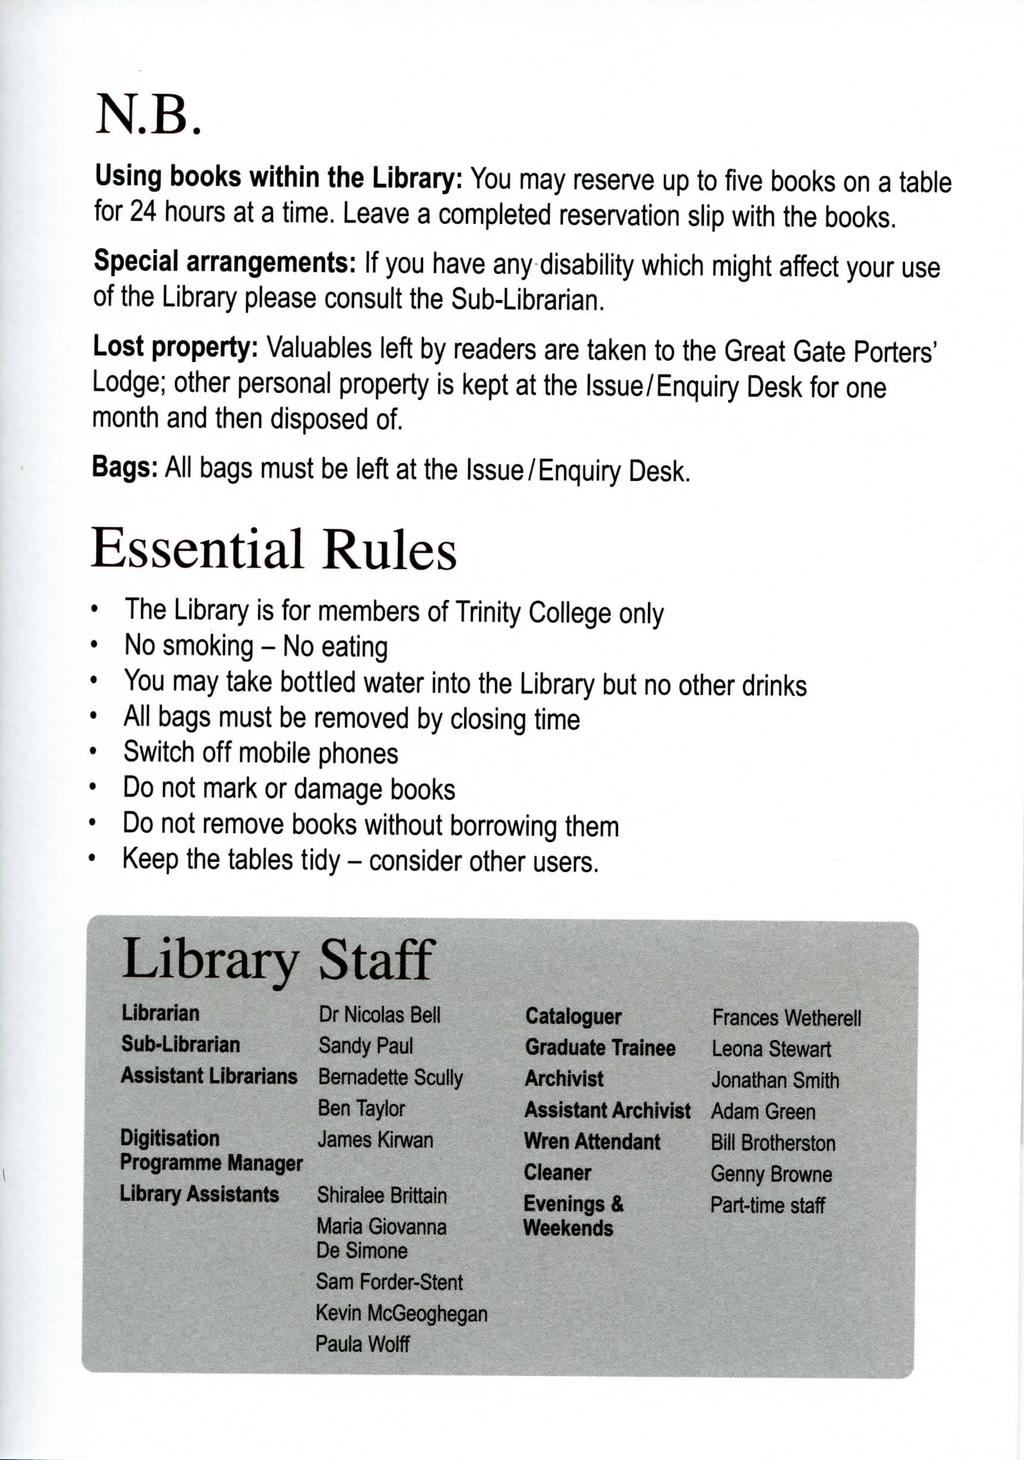 N.B. Using books within the Library: You may reserve up to five books on a table for 24 hours at a time. Leave a completed reservation slip with the books.